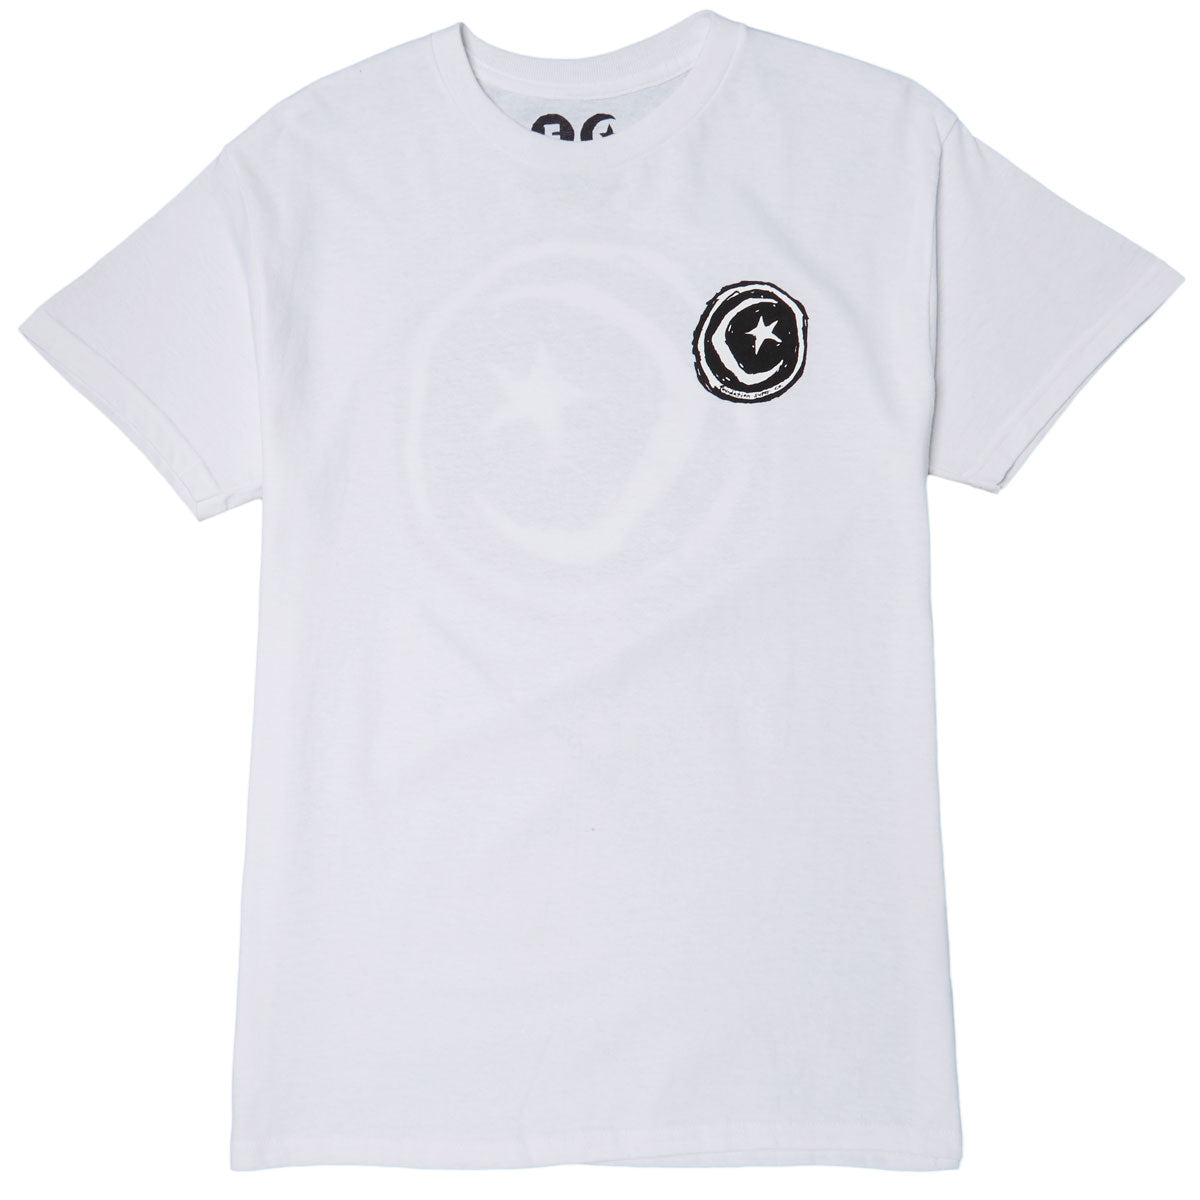 Foundation Star And Moon T-Shirt - White image 2